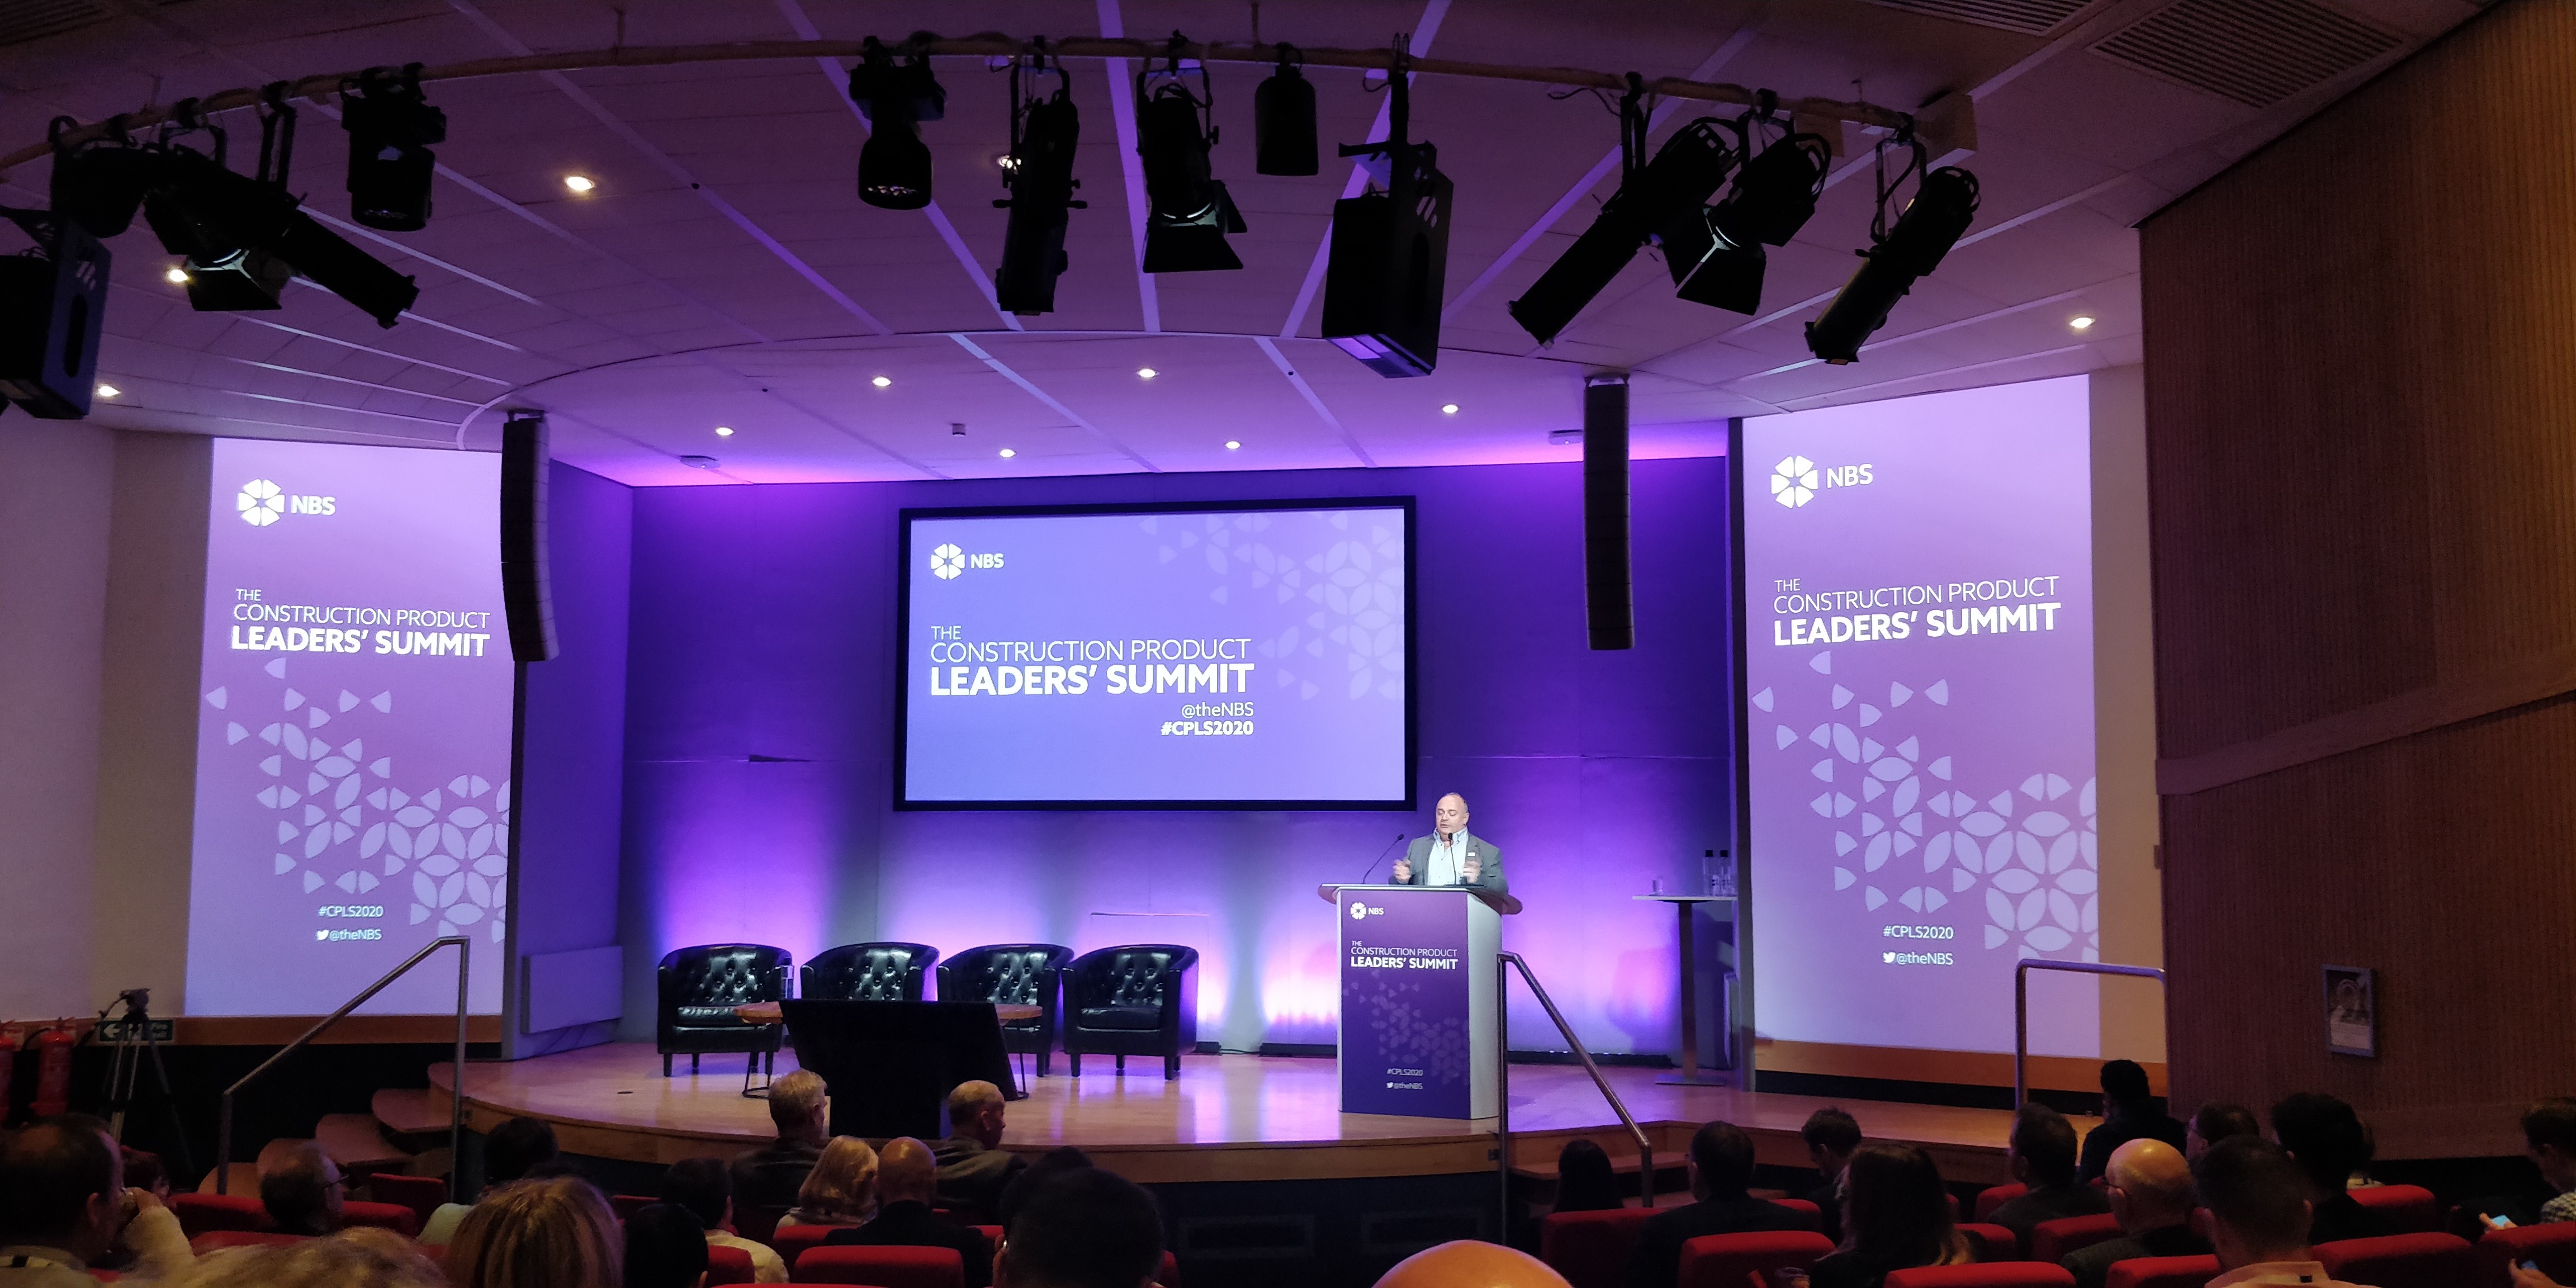 Construction Product Leaders Summit 2020